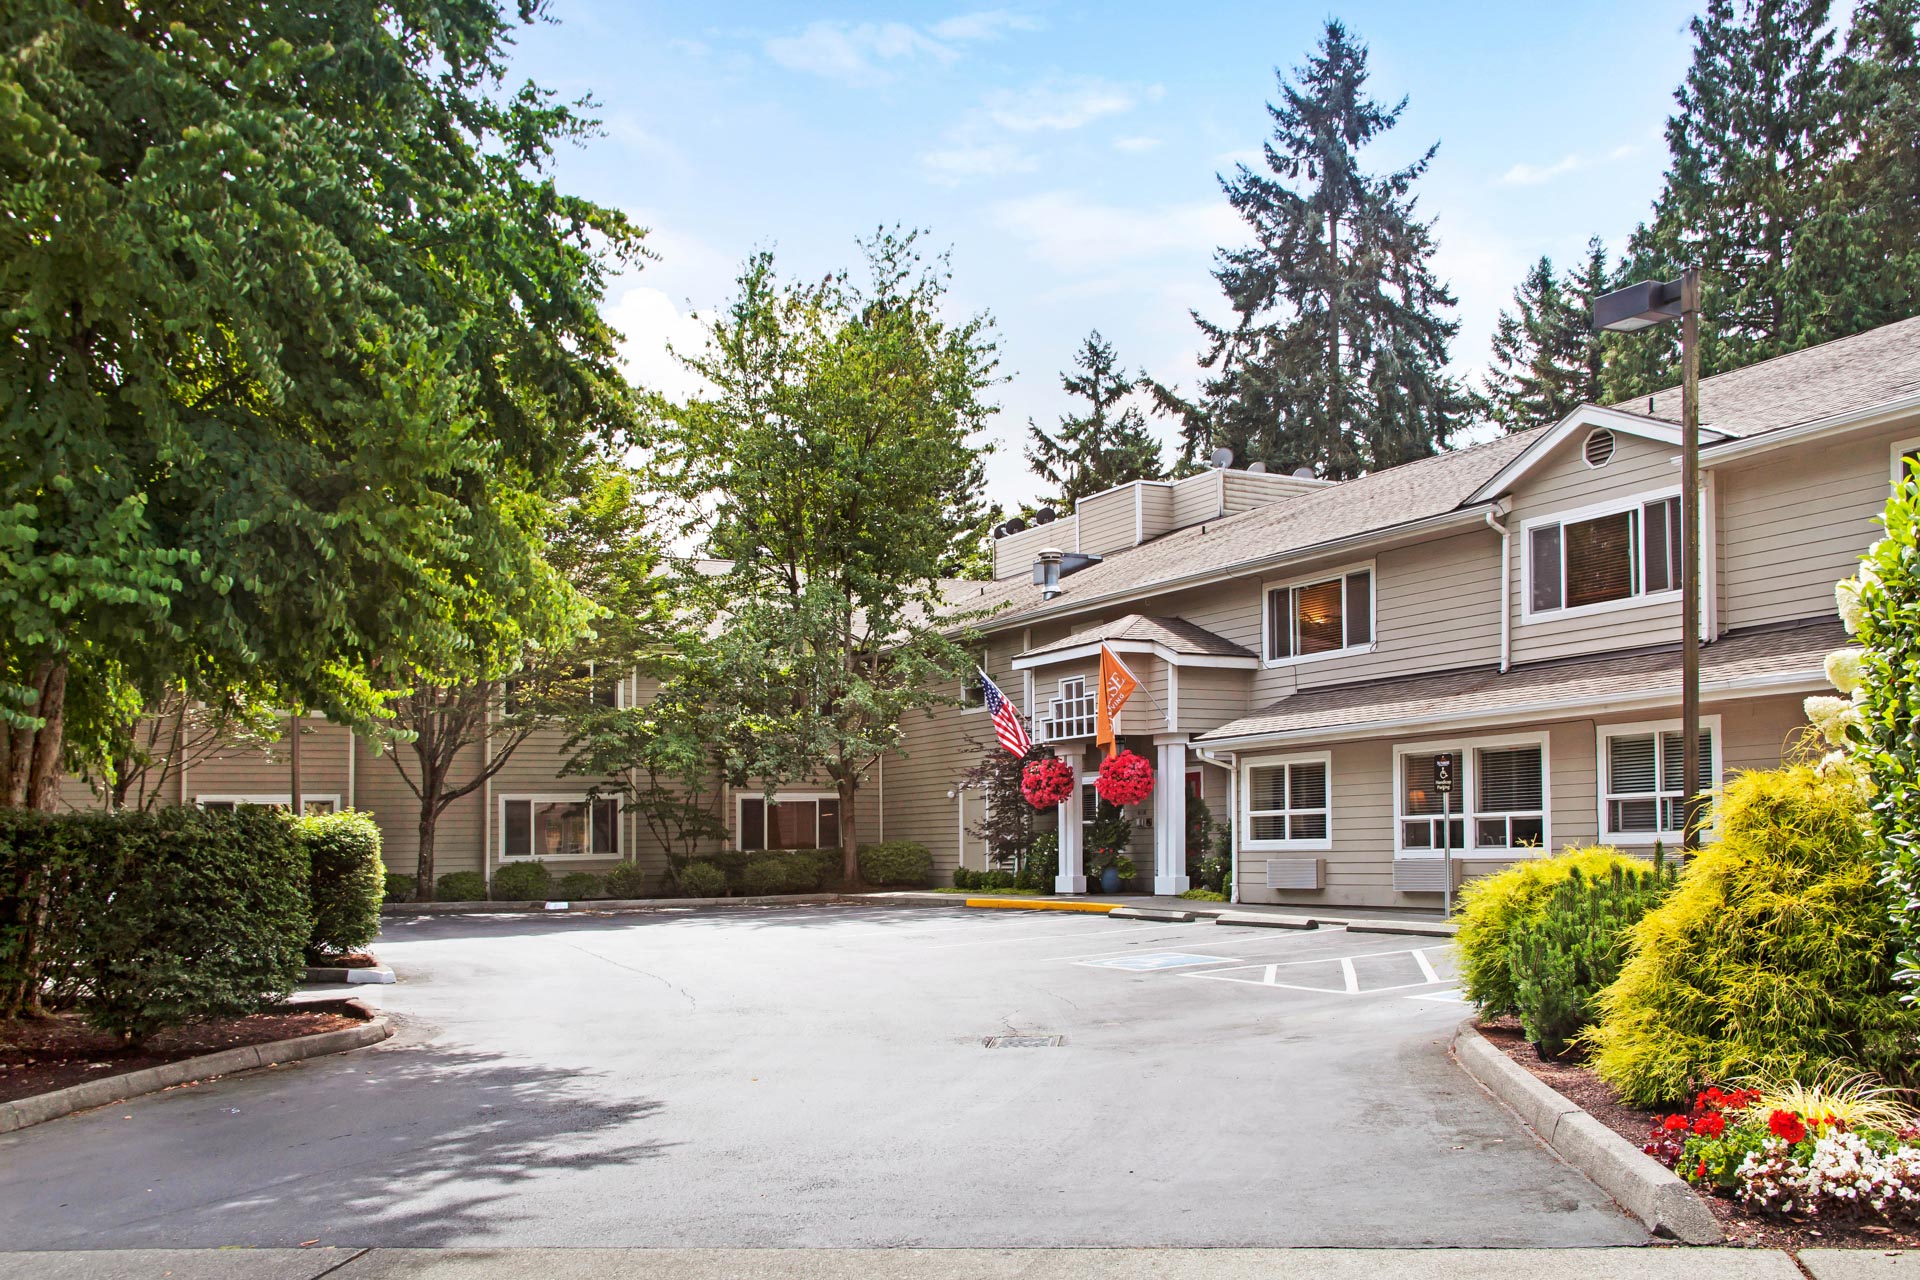 Property Exterior at Cogir of Northgate Memory Care, Seattle, WA